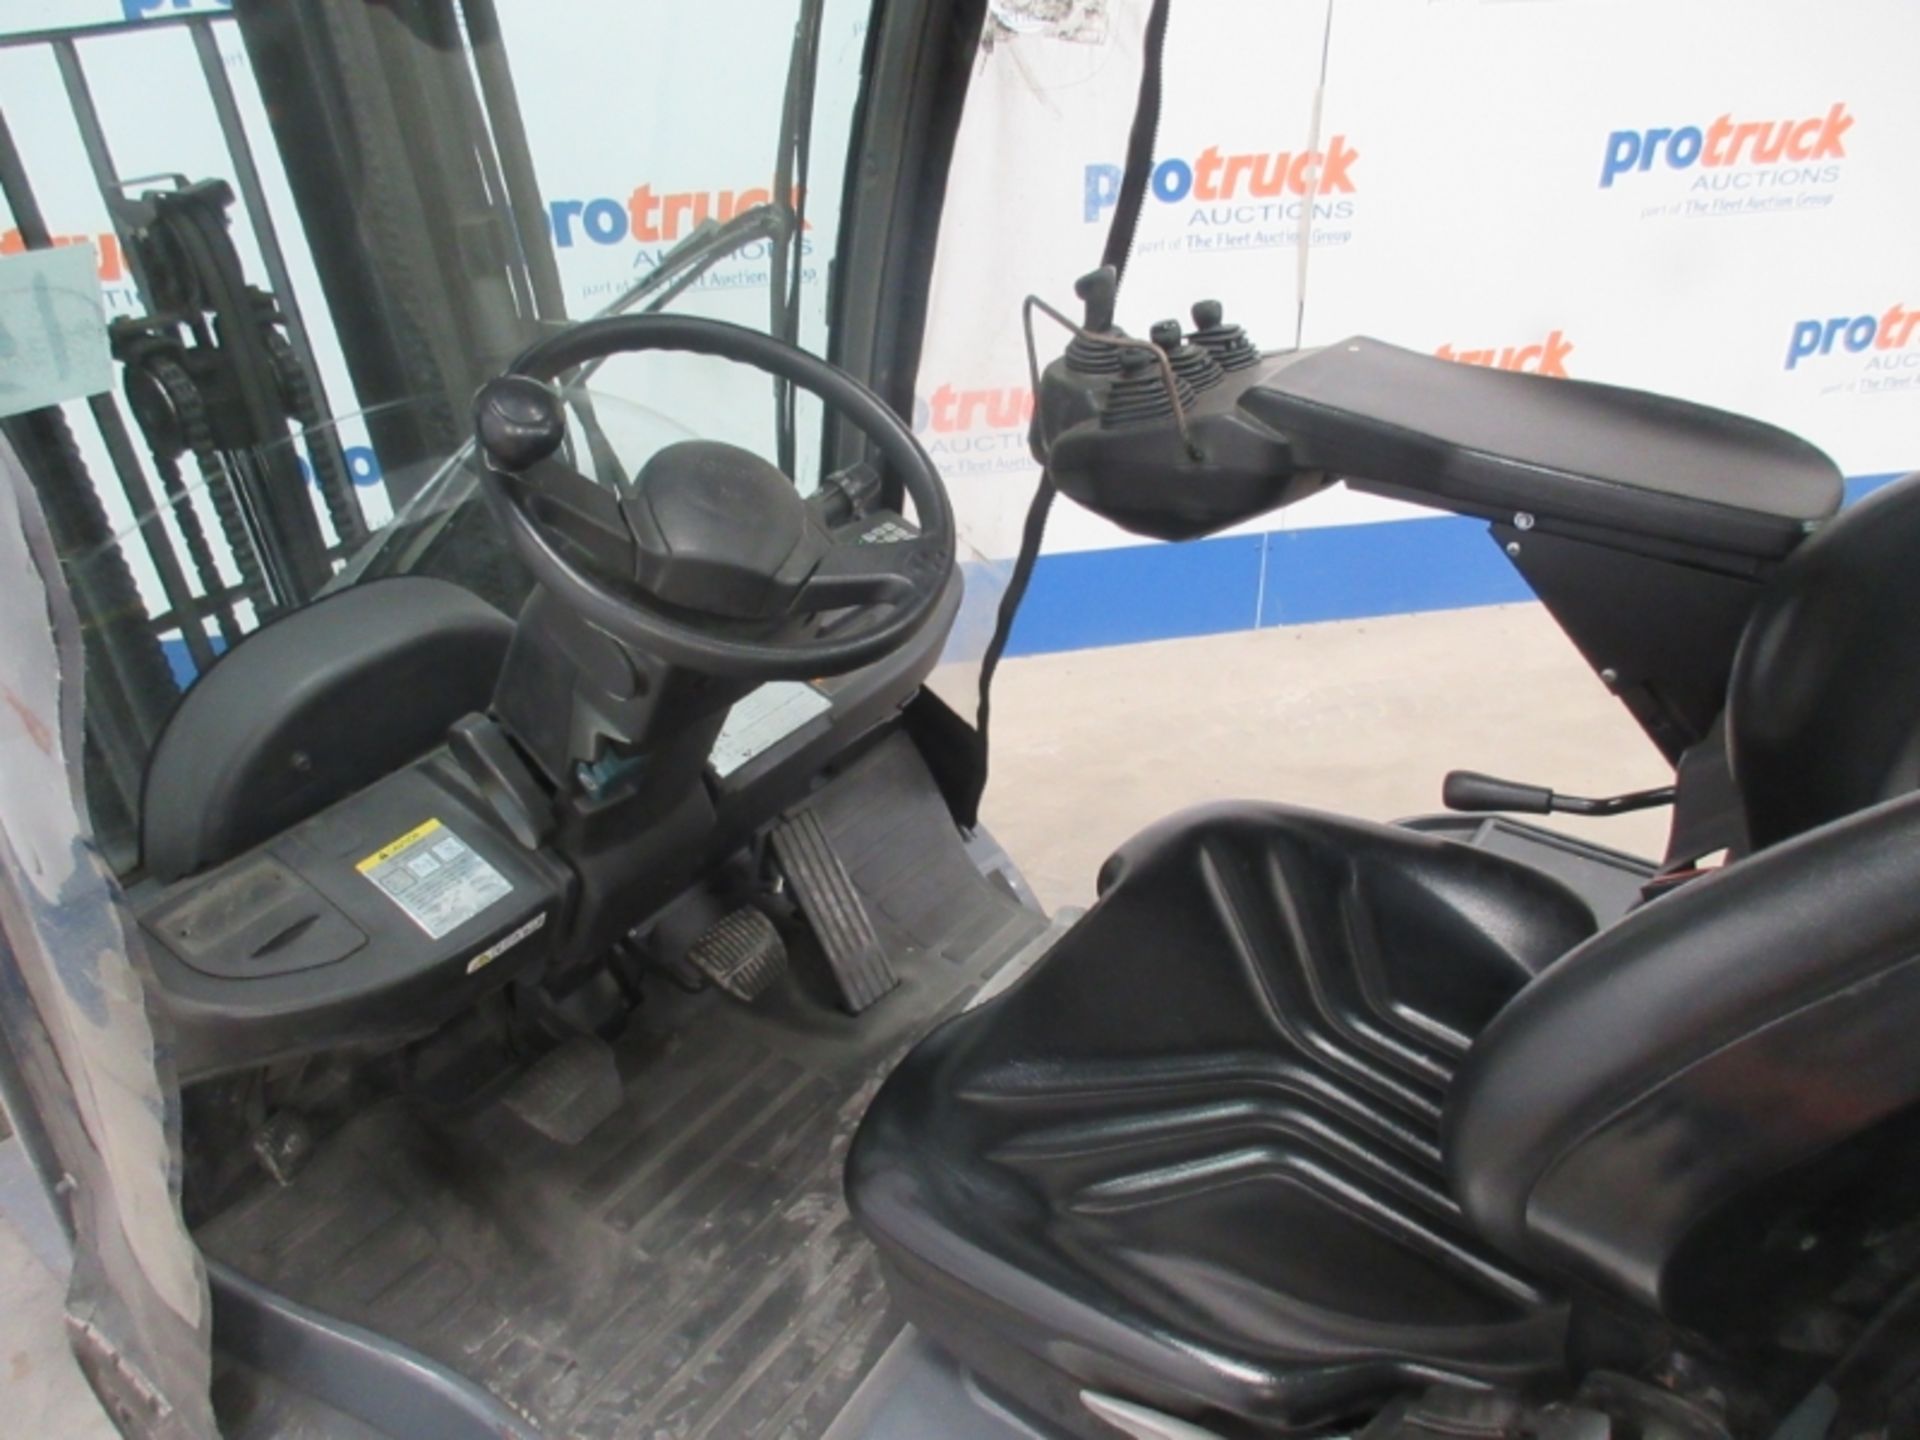 TOYOTA 02-8FGF18 Plant LPG / CNG - VIN: 8FGF18E61927 - Year: 2016 - 10,230 Hours - Triplex Forklift, - Image 5 of 7